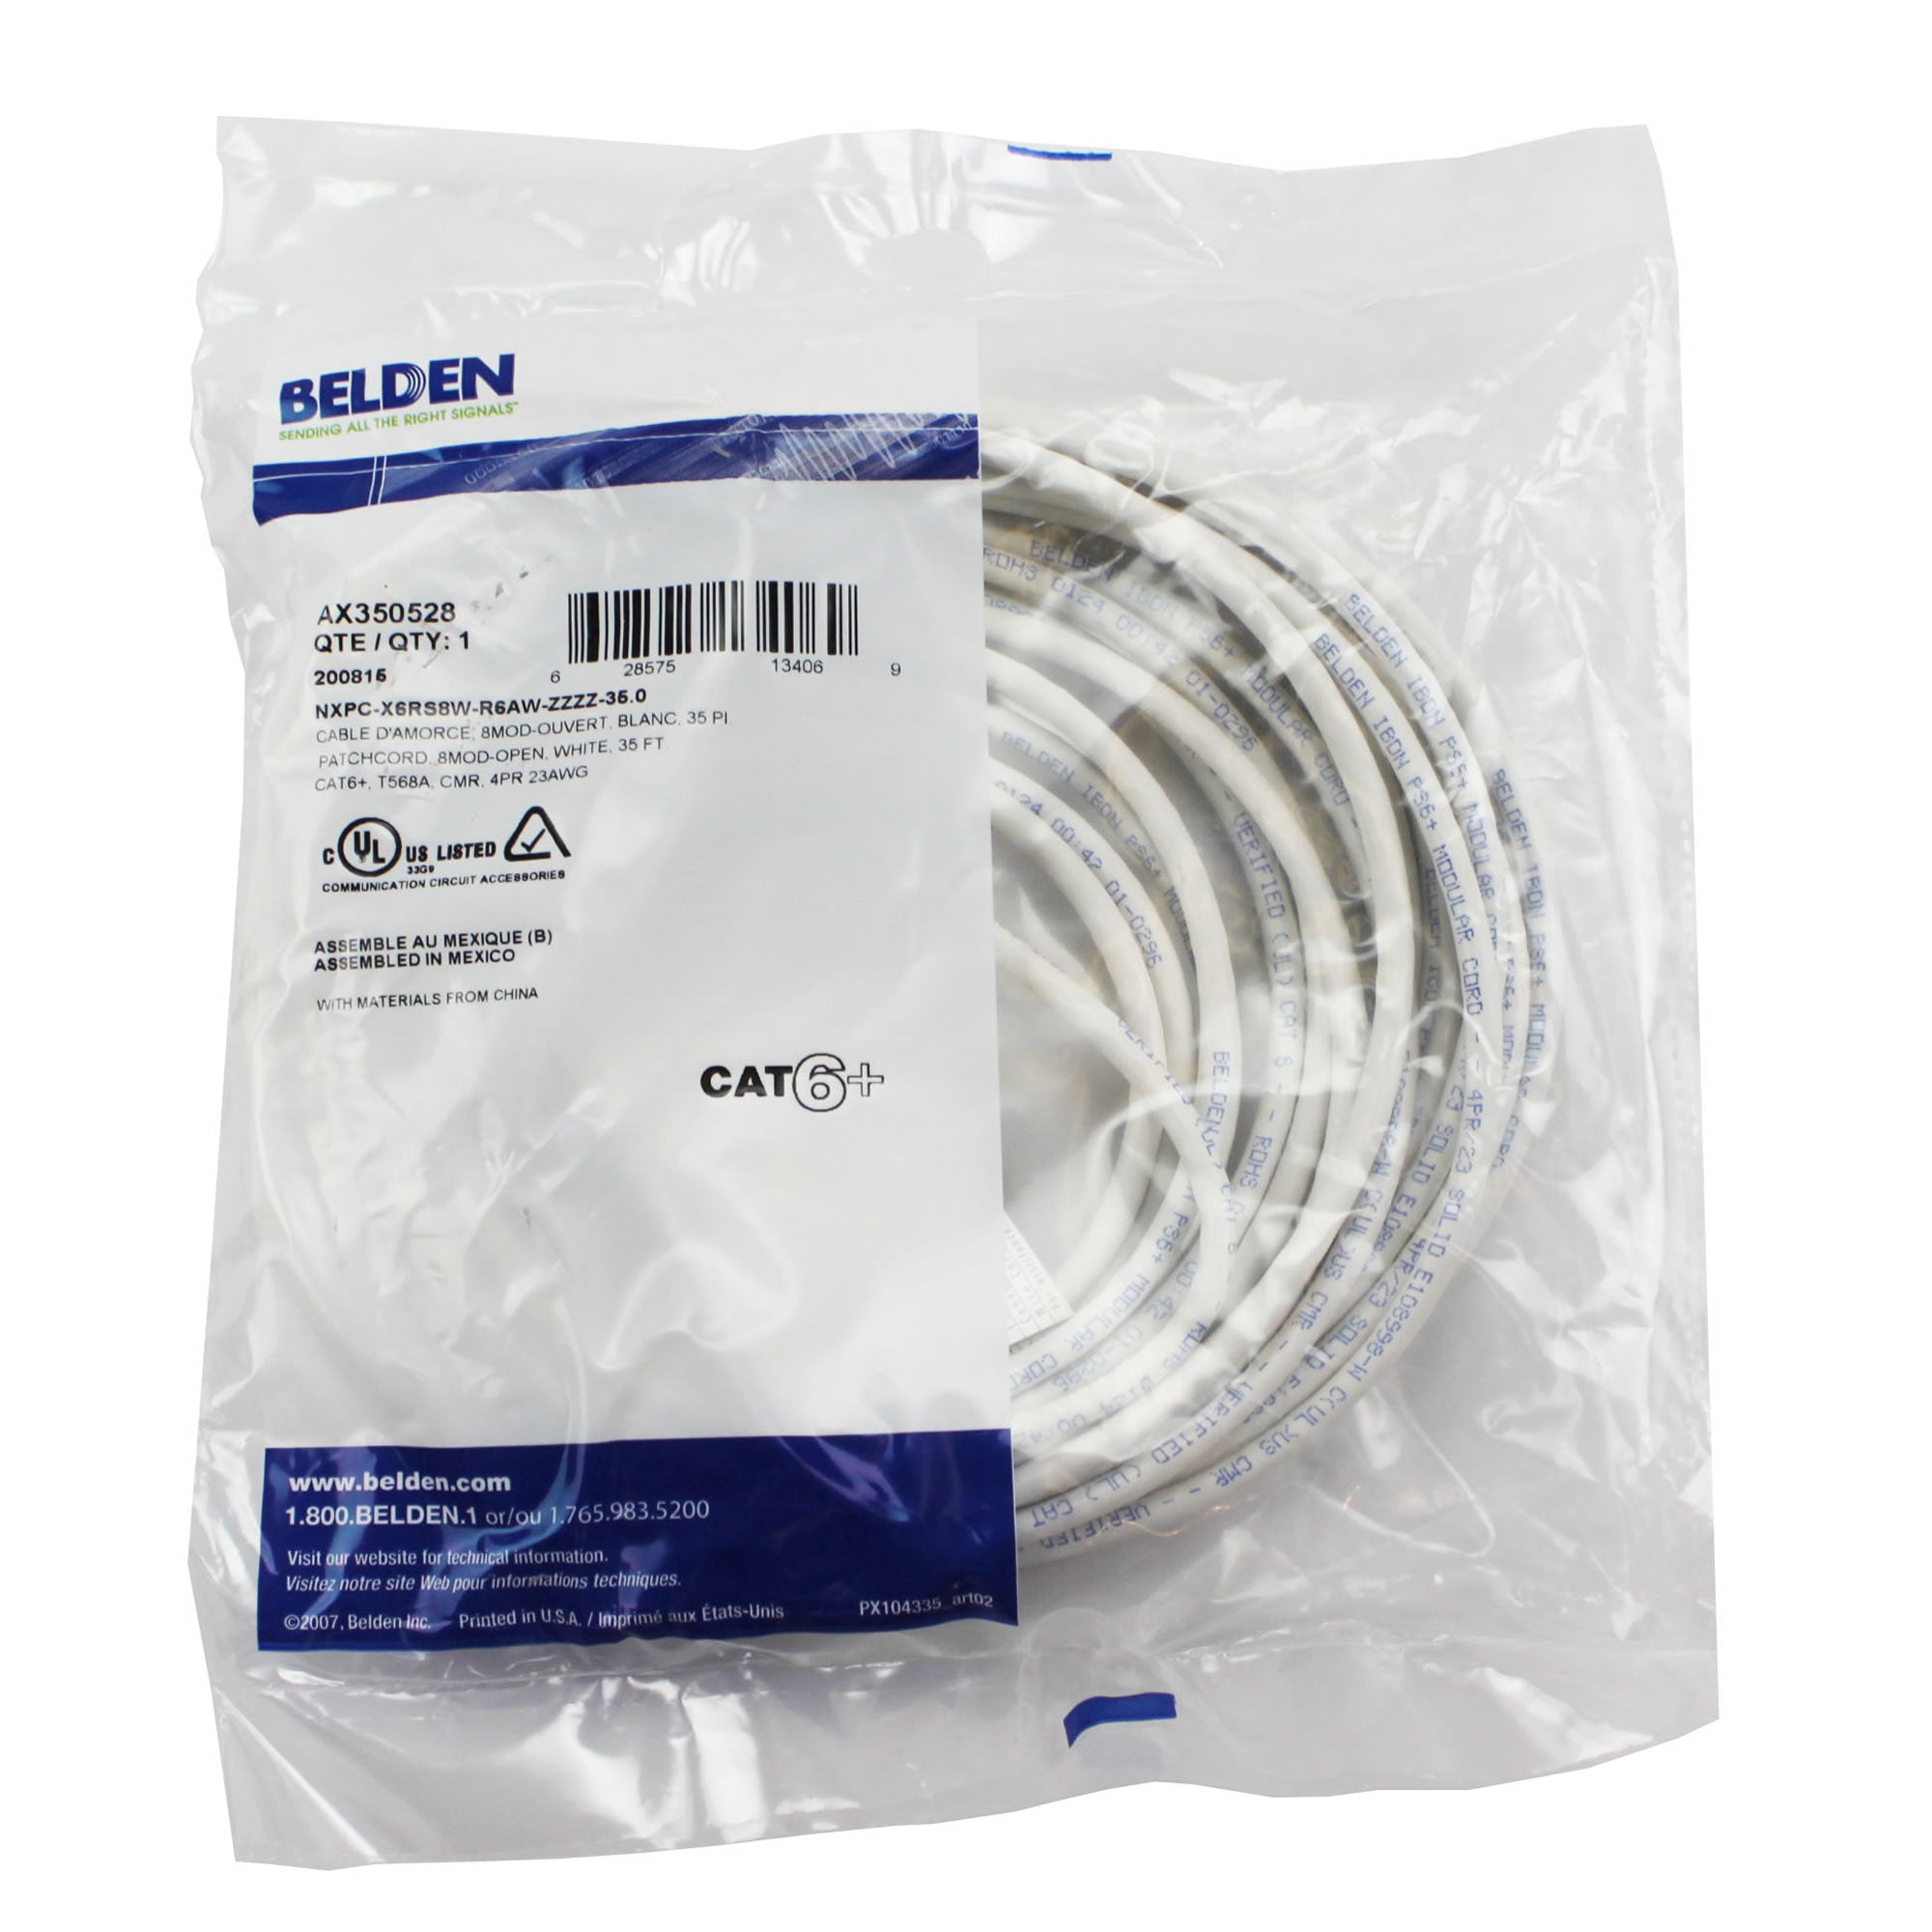 Belden, BELDEN AX350528 35' WHITE 4 PAIR 23AWG CAT6 PATCH CORD CABLE - WHITE OPEN END